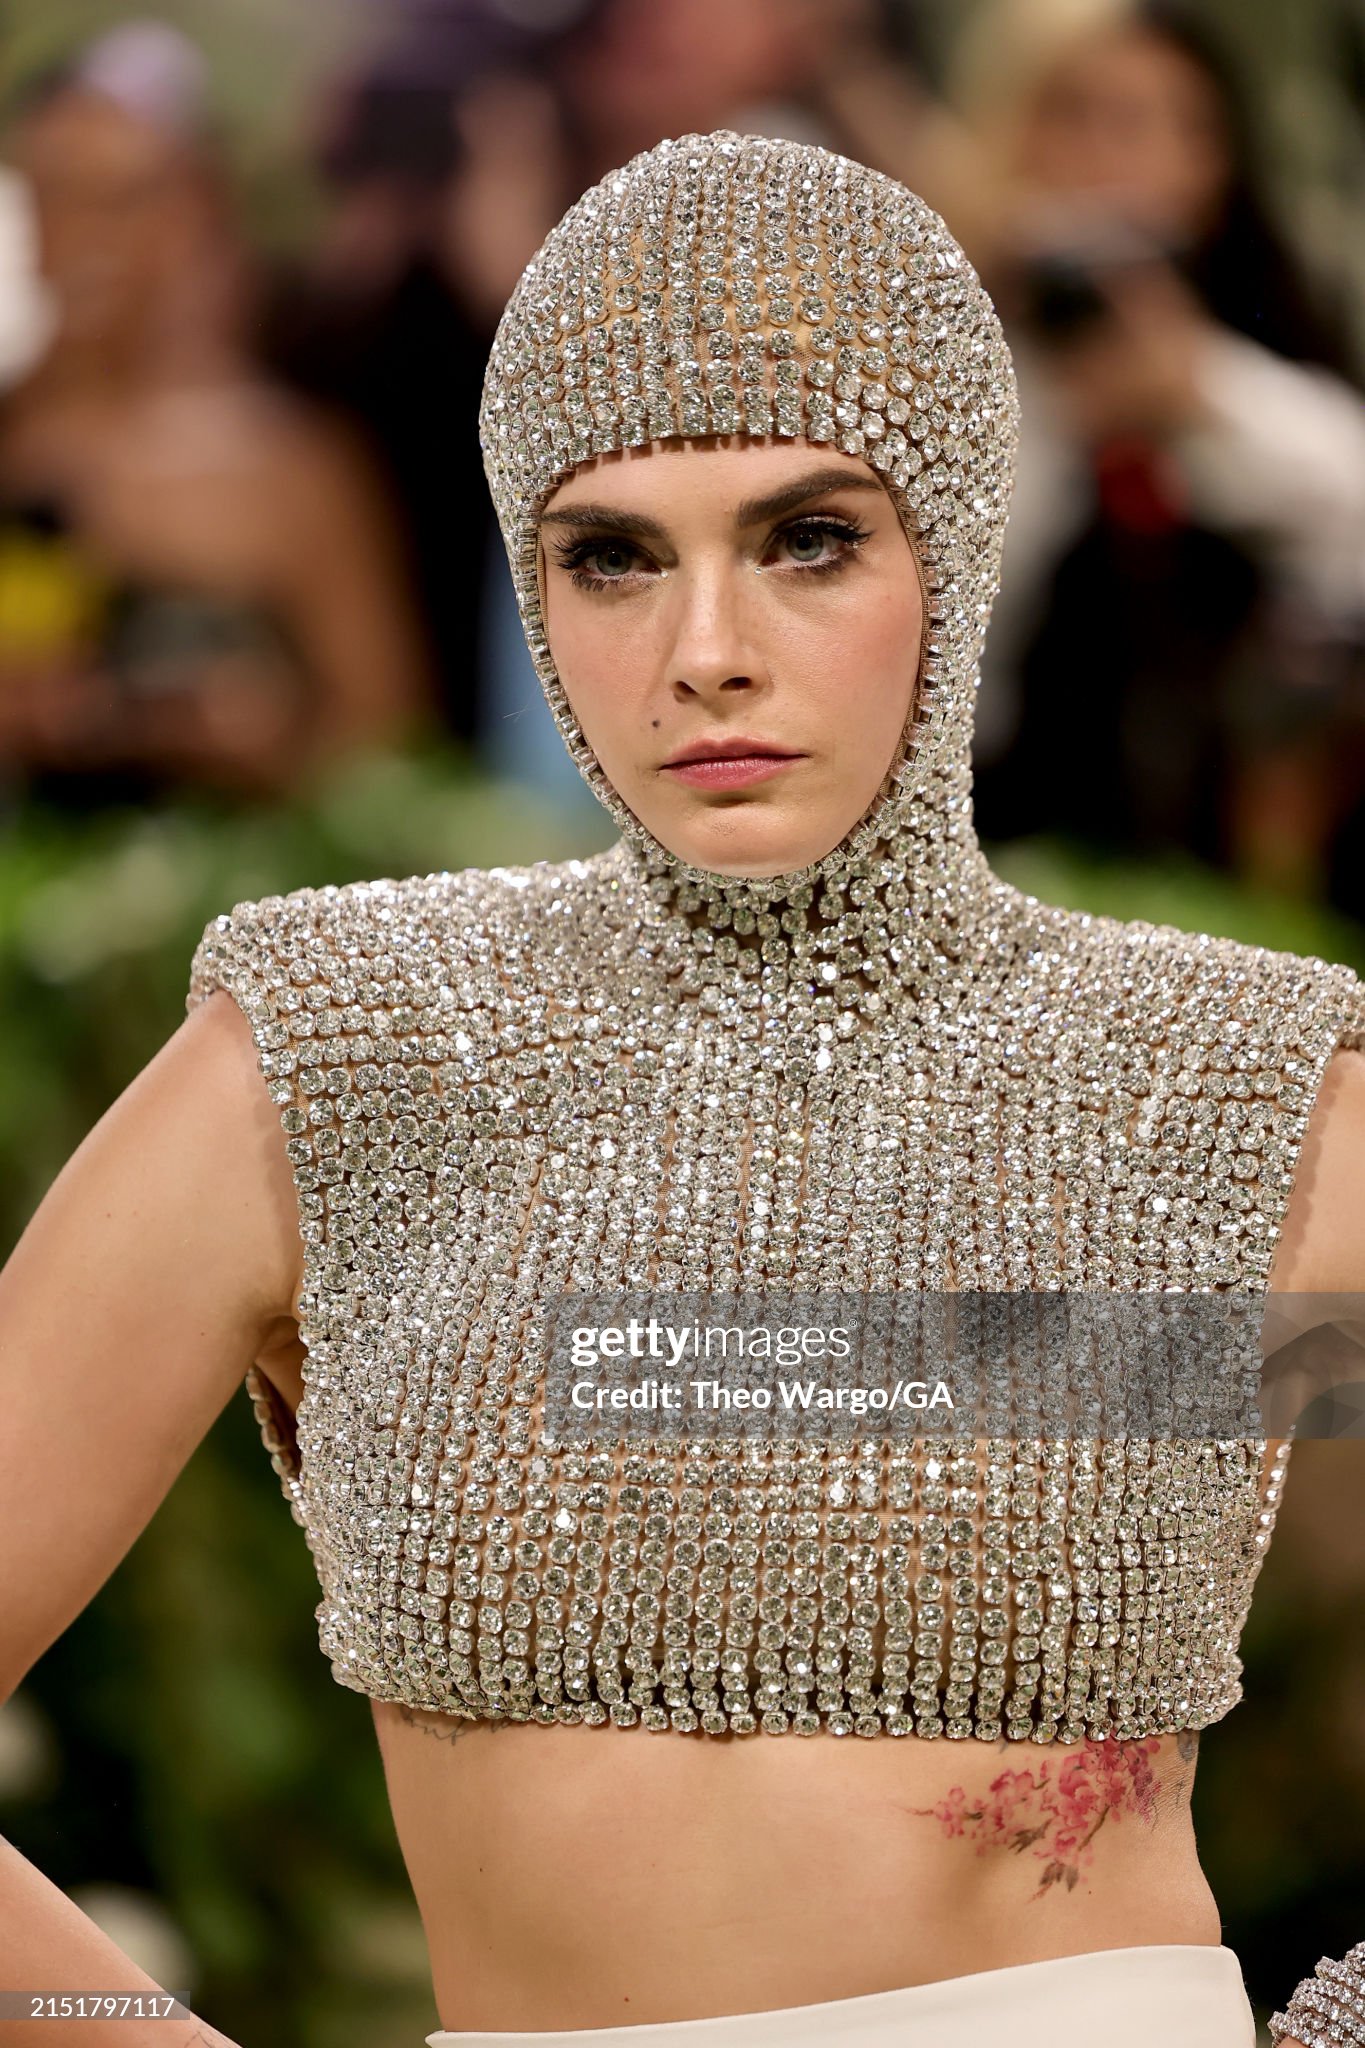 gettyimages-2151797117-2048x2048.jpg